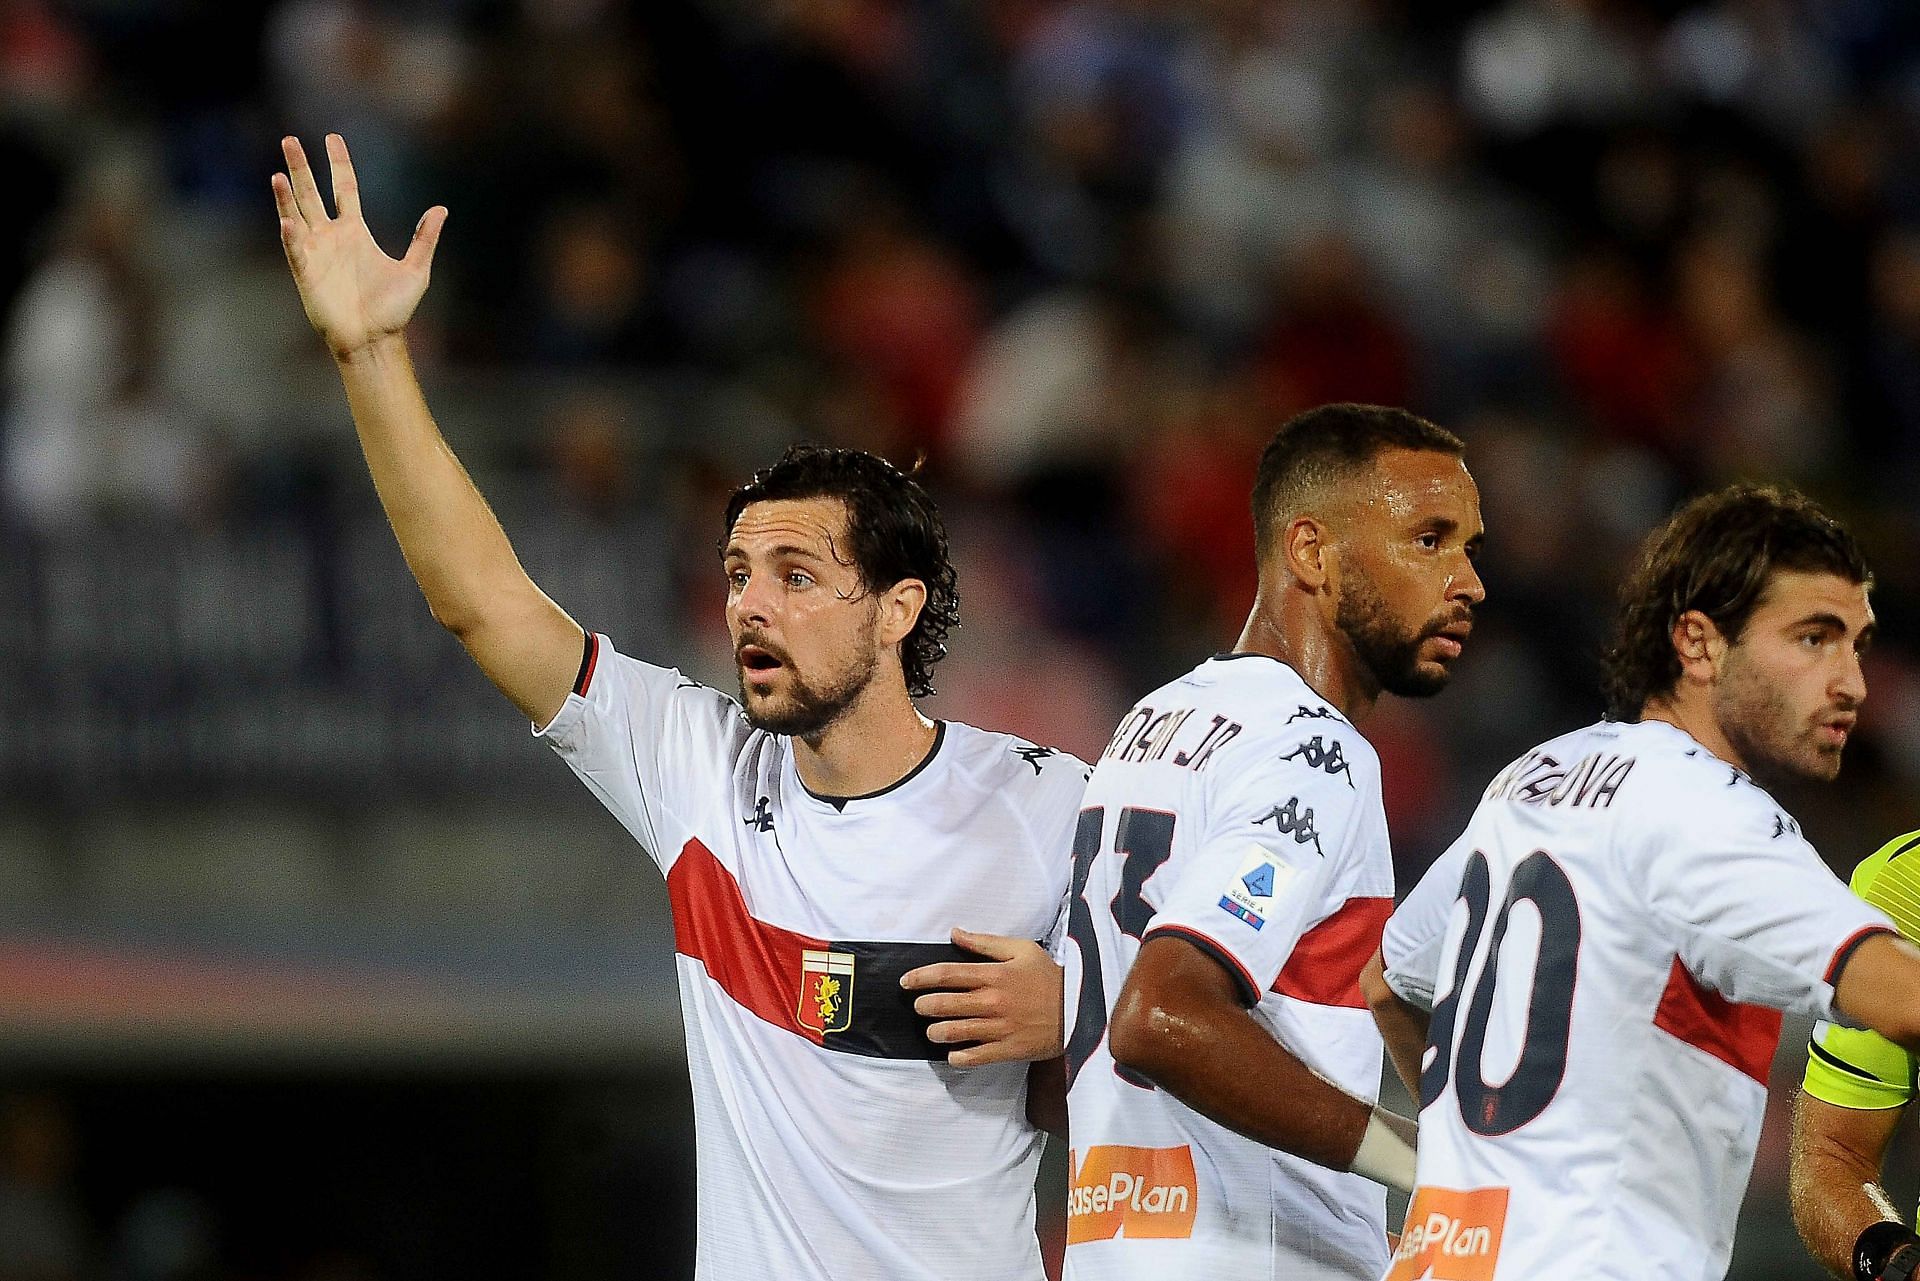 Genoa CFC will face Empoli on Friday in Serie A